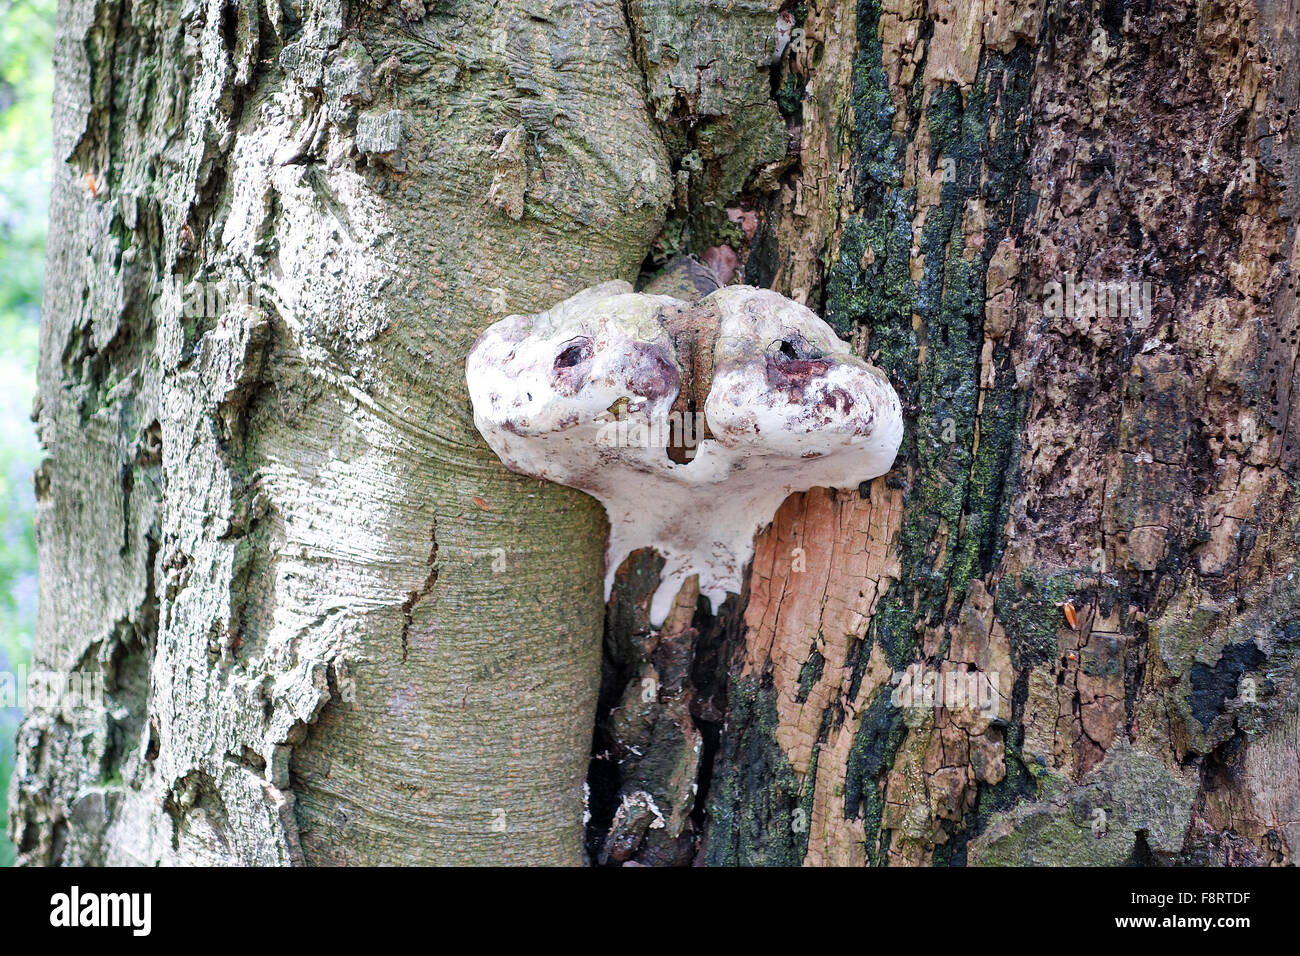 A fungus or fungi growing on the side of a tree looking like ET Stock Photo